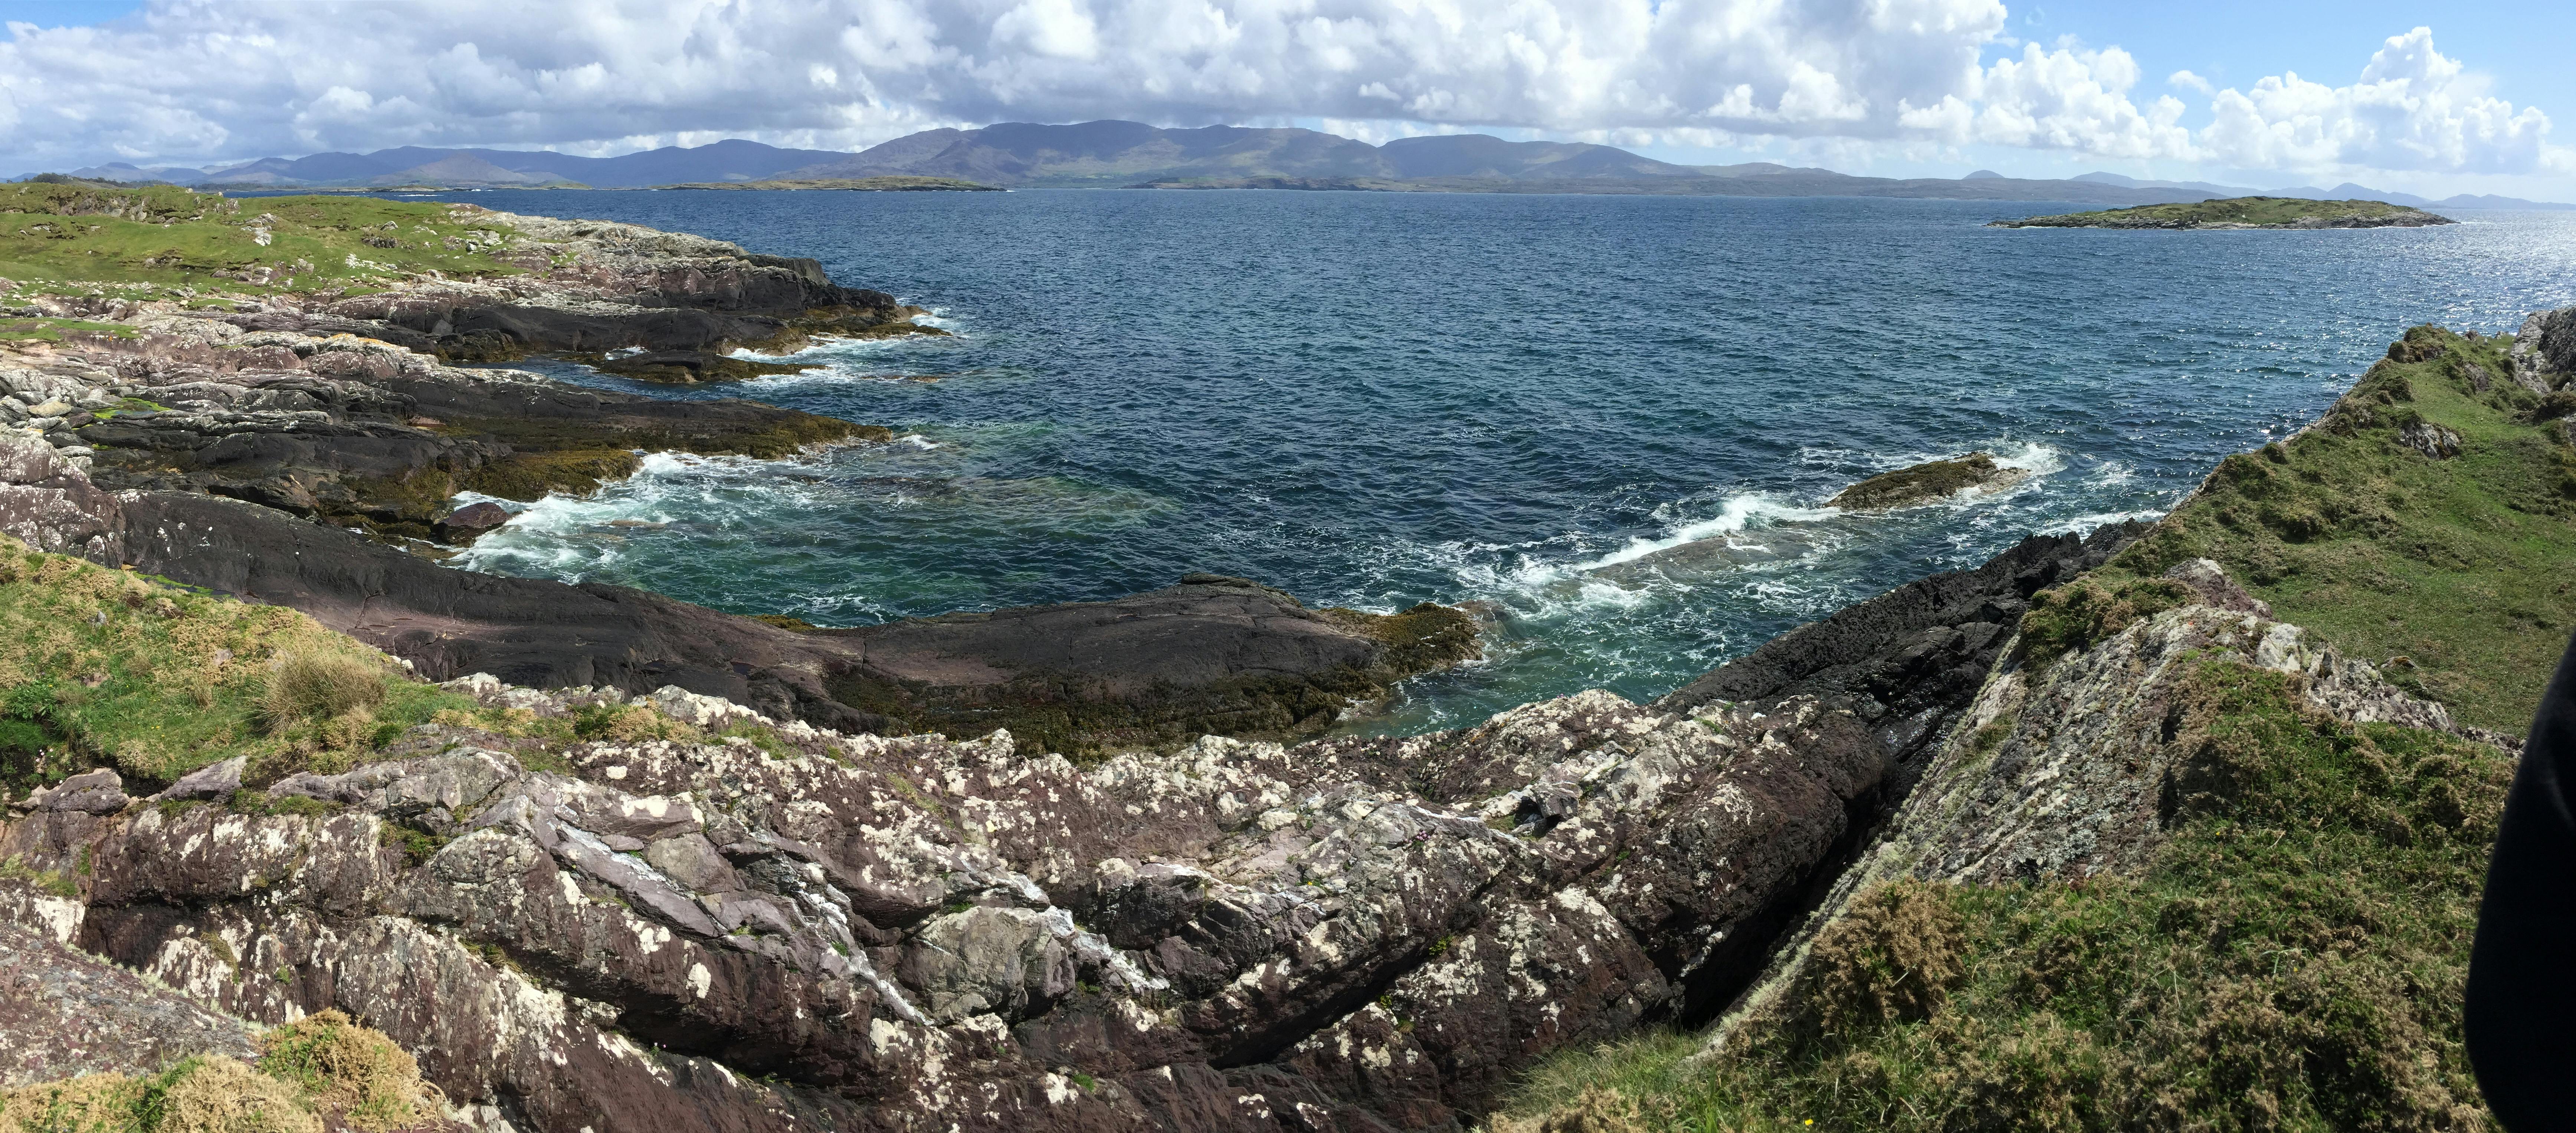 Kenmare Bay View from Shore Rocks at Gleesk Pier